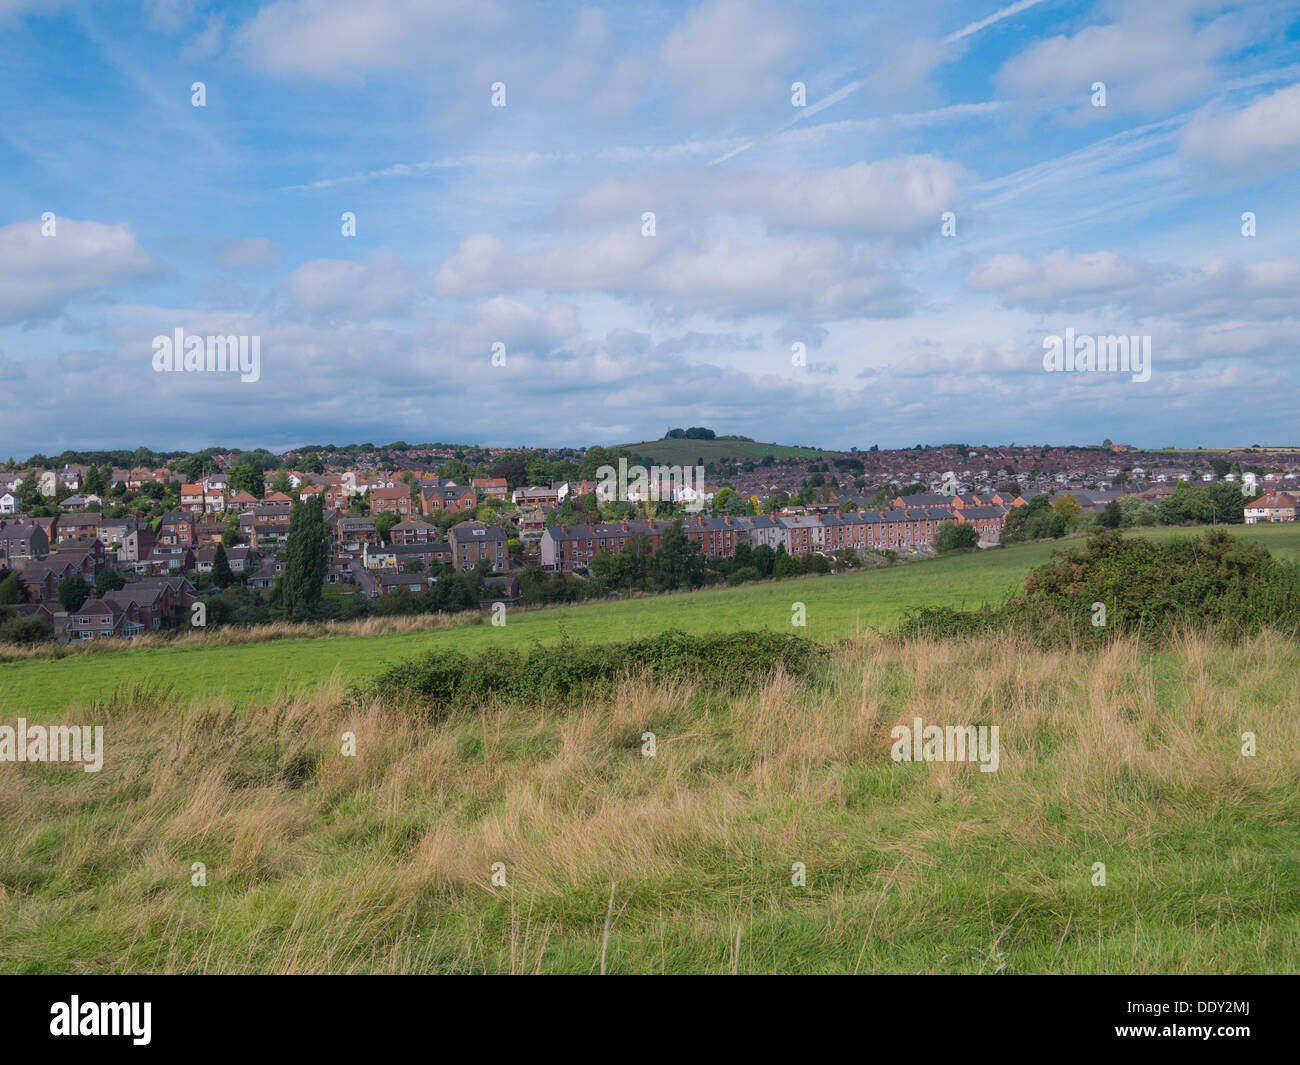 View of a town and houses from some fields in the summer set against a moody blue and cloudy sky. Stock Photo